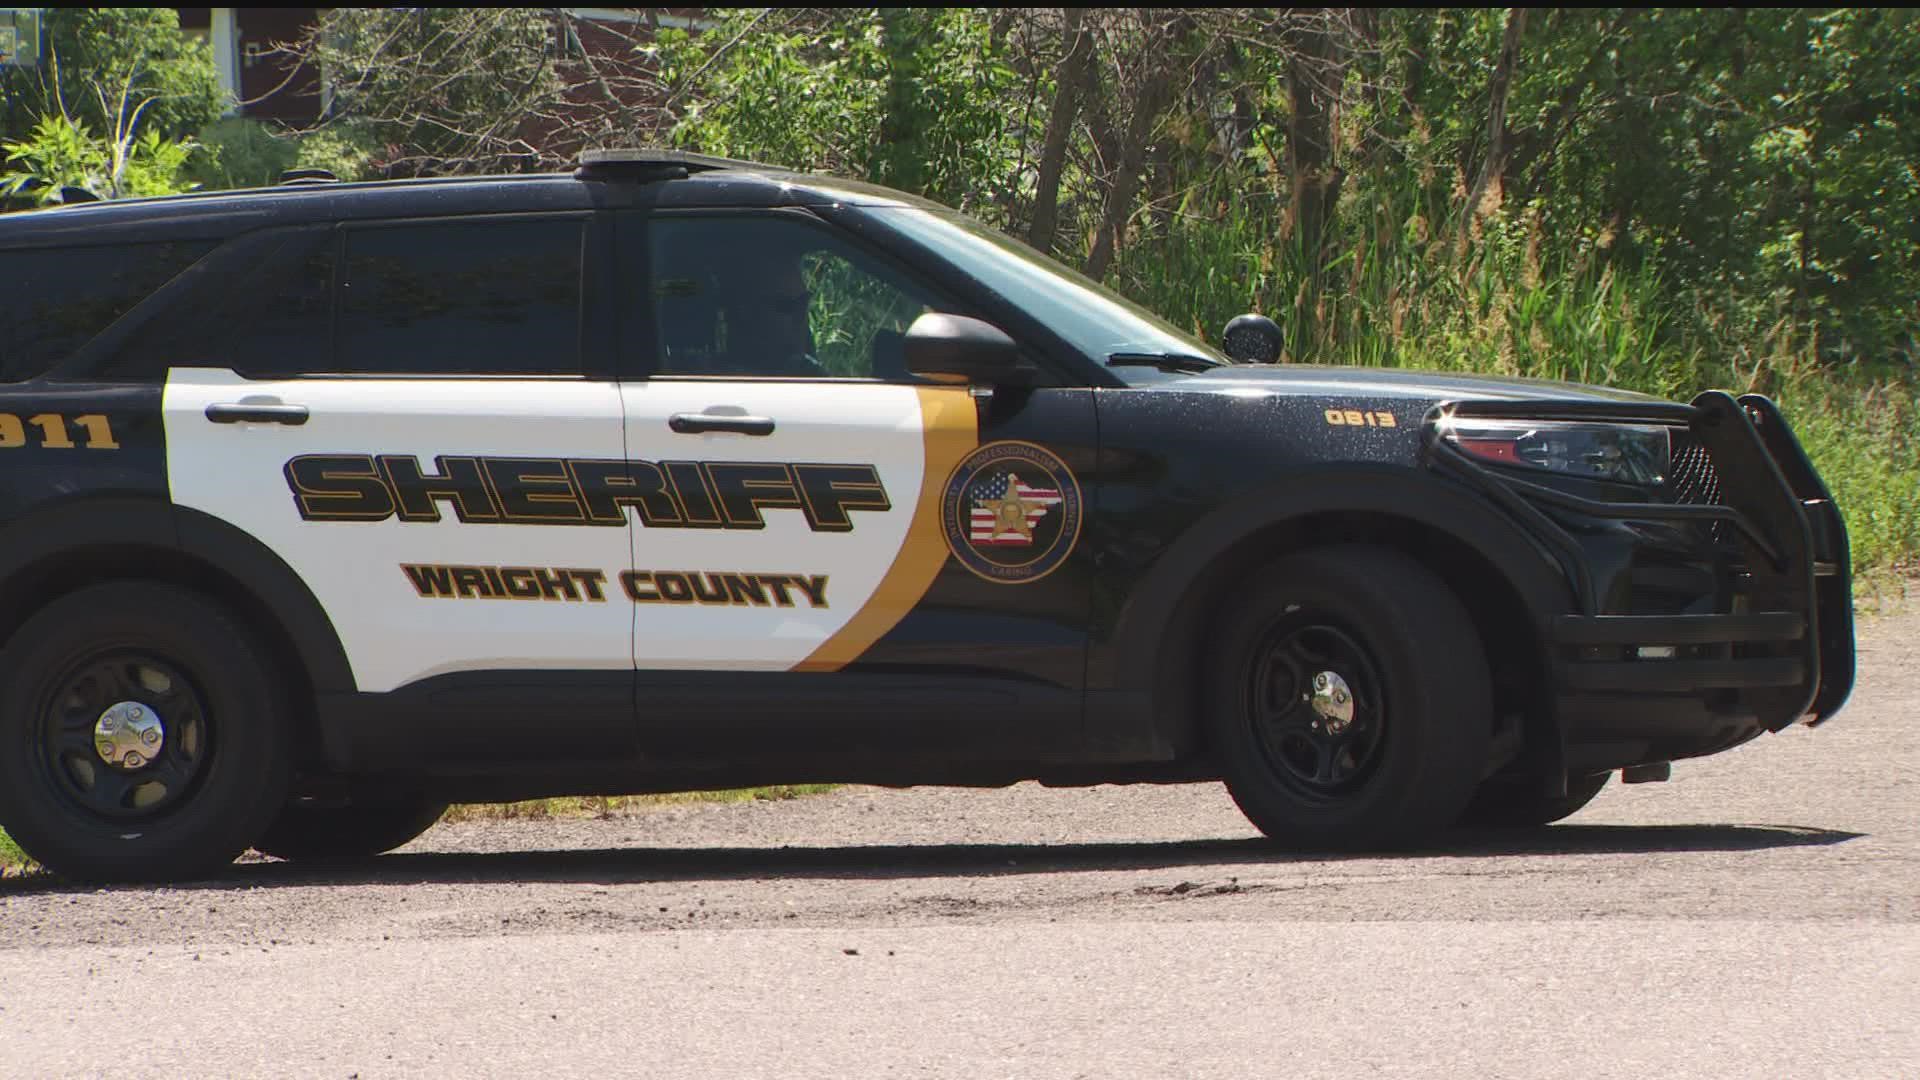 The Wright County Sheriff's Office said an armed man with active warrants for his arrest was holed up inside a residence and fired on law enforcement.